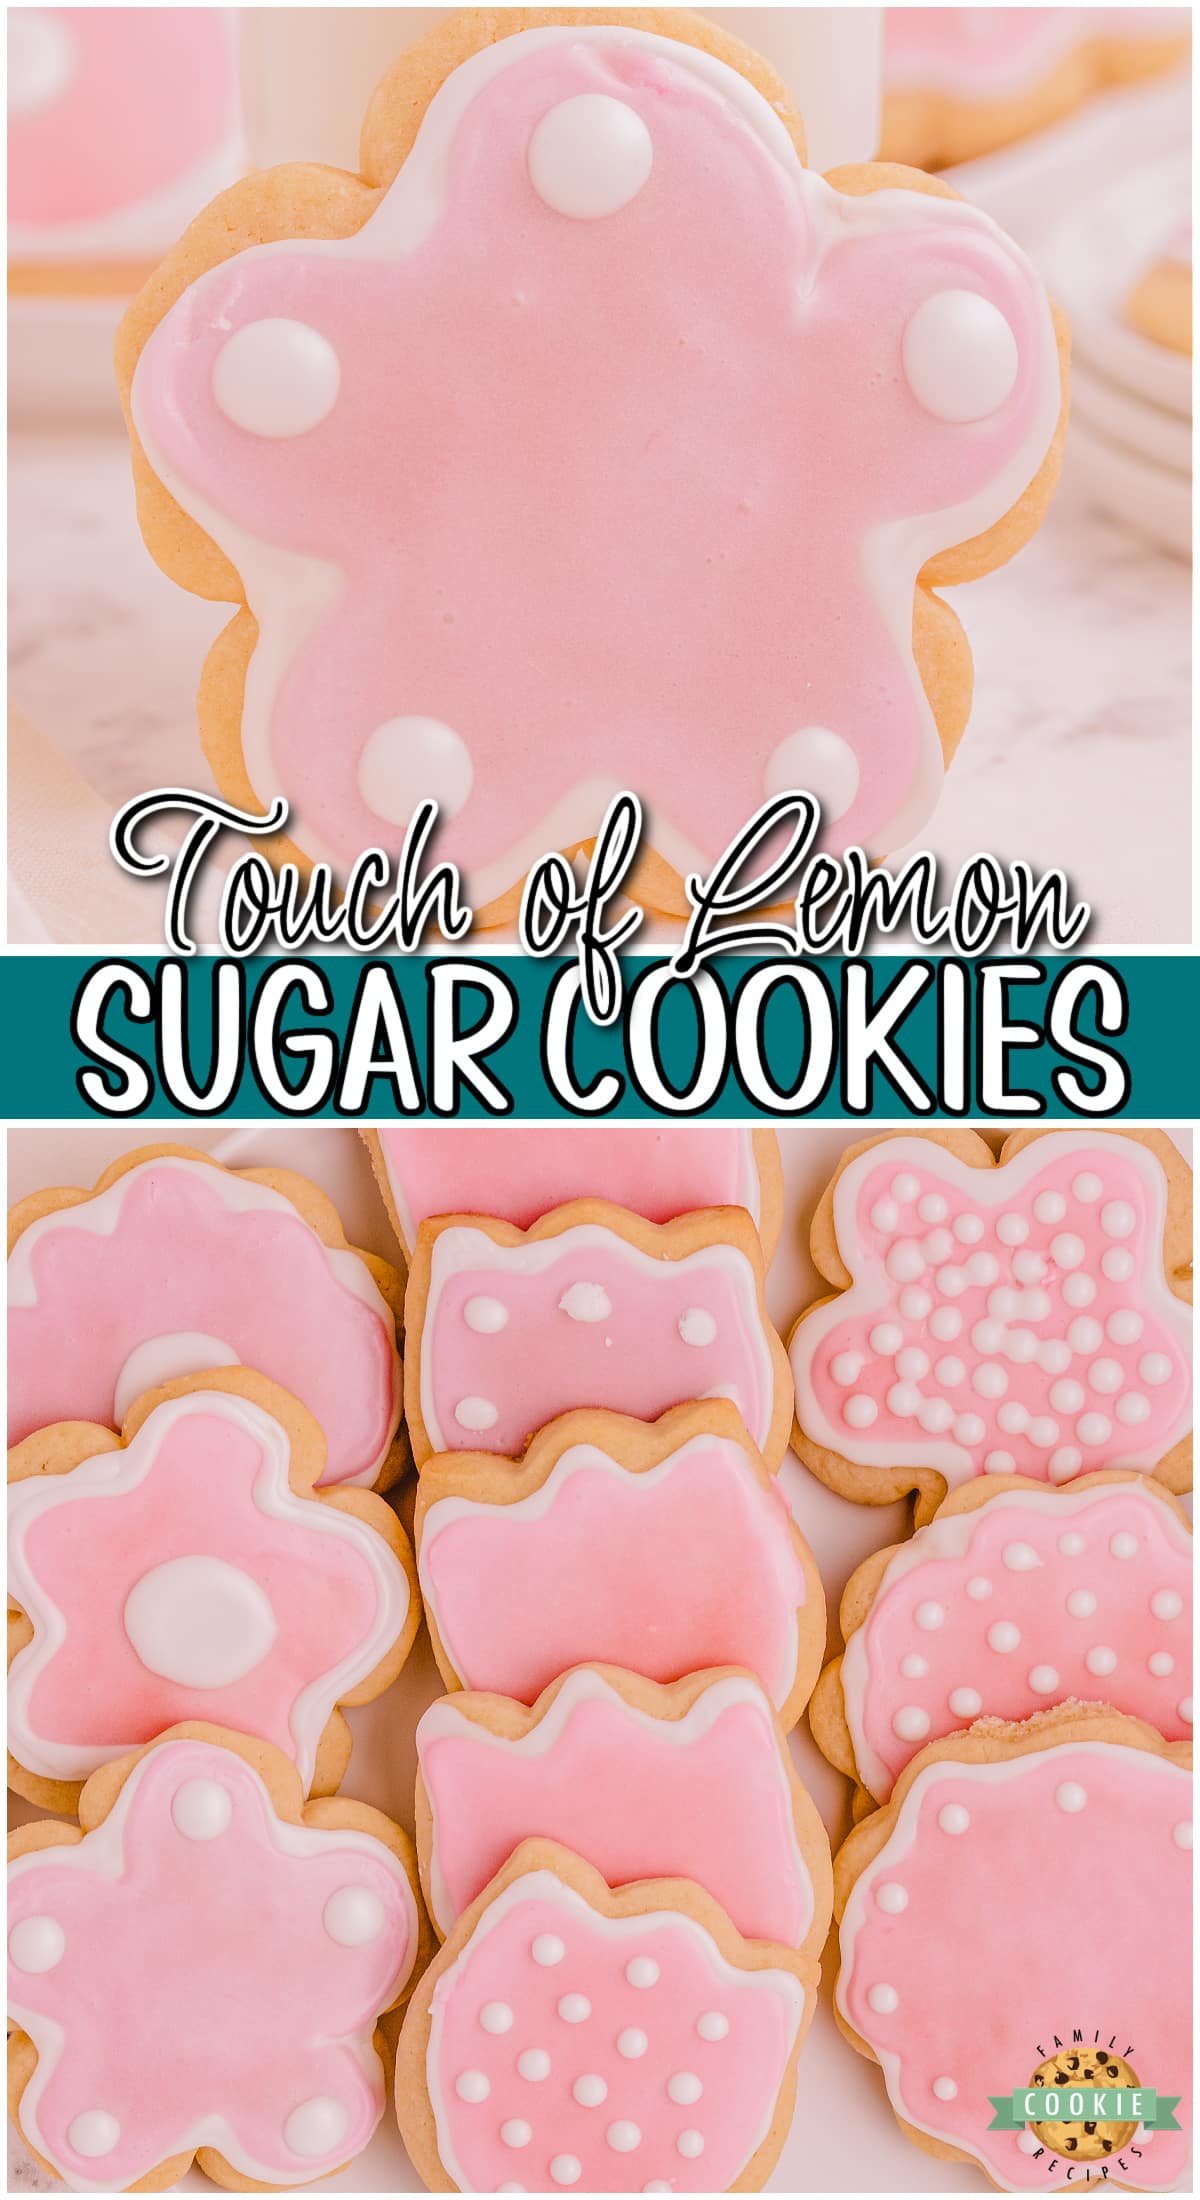 Lemon Cut Out Sugar Cookies topped with a sweet royal icing tinted in darling Spring colors! Lovely sugar cookie recipe with a hint of lemon flavor!